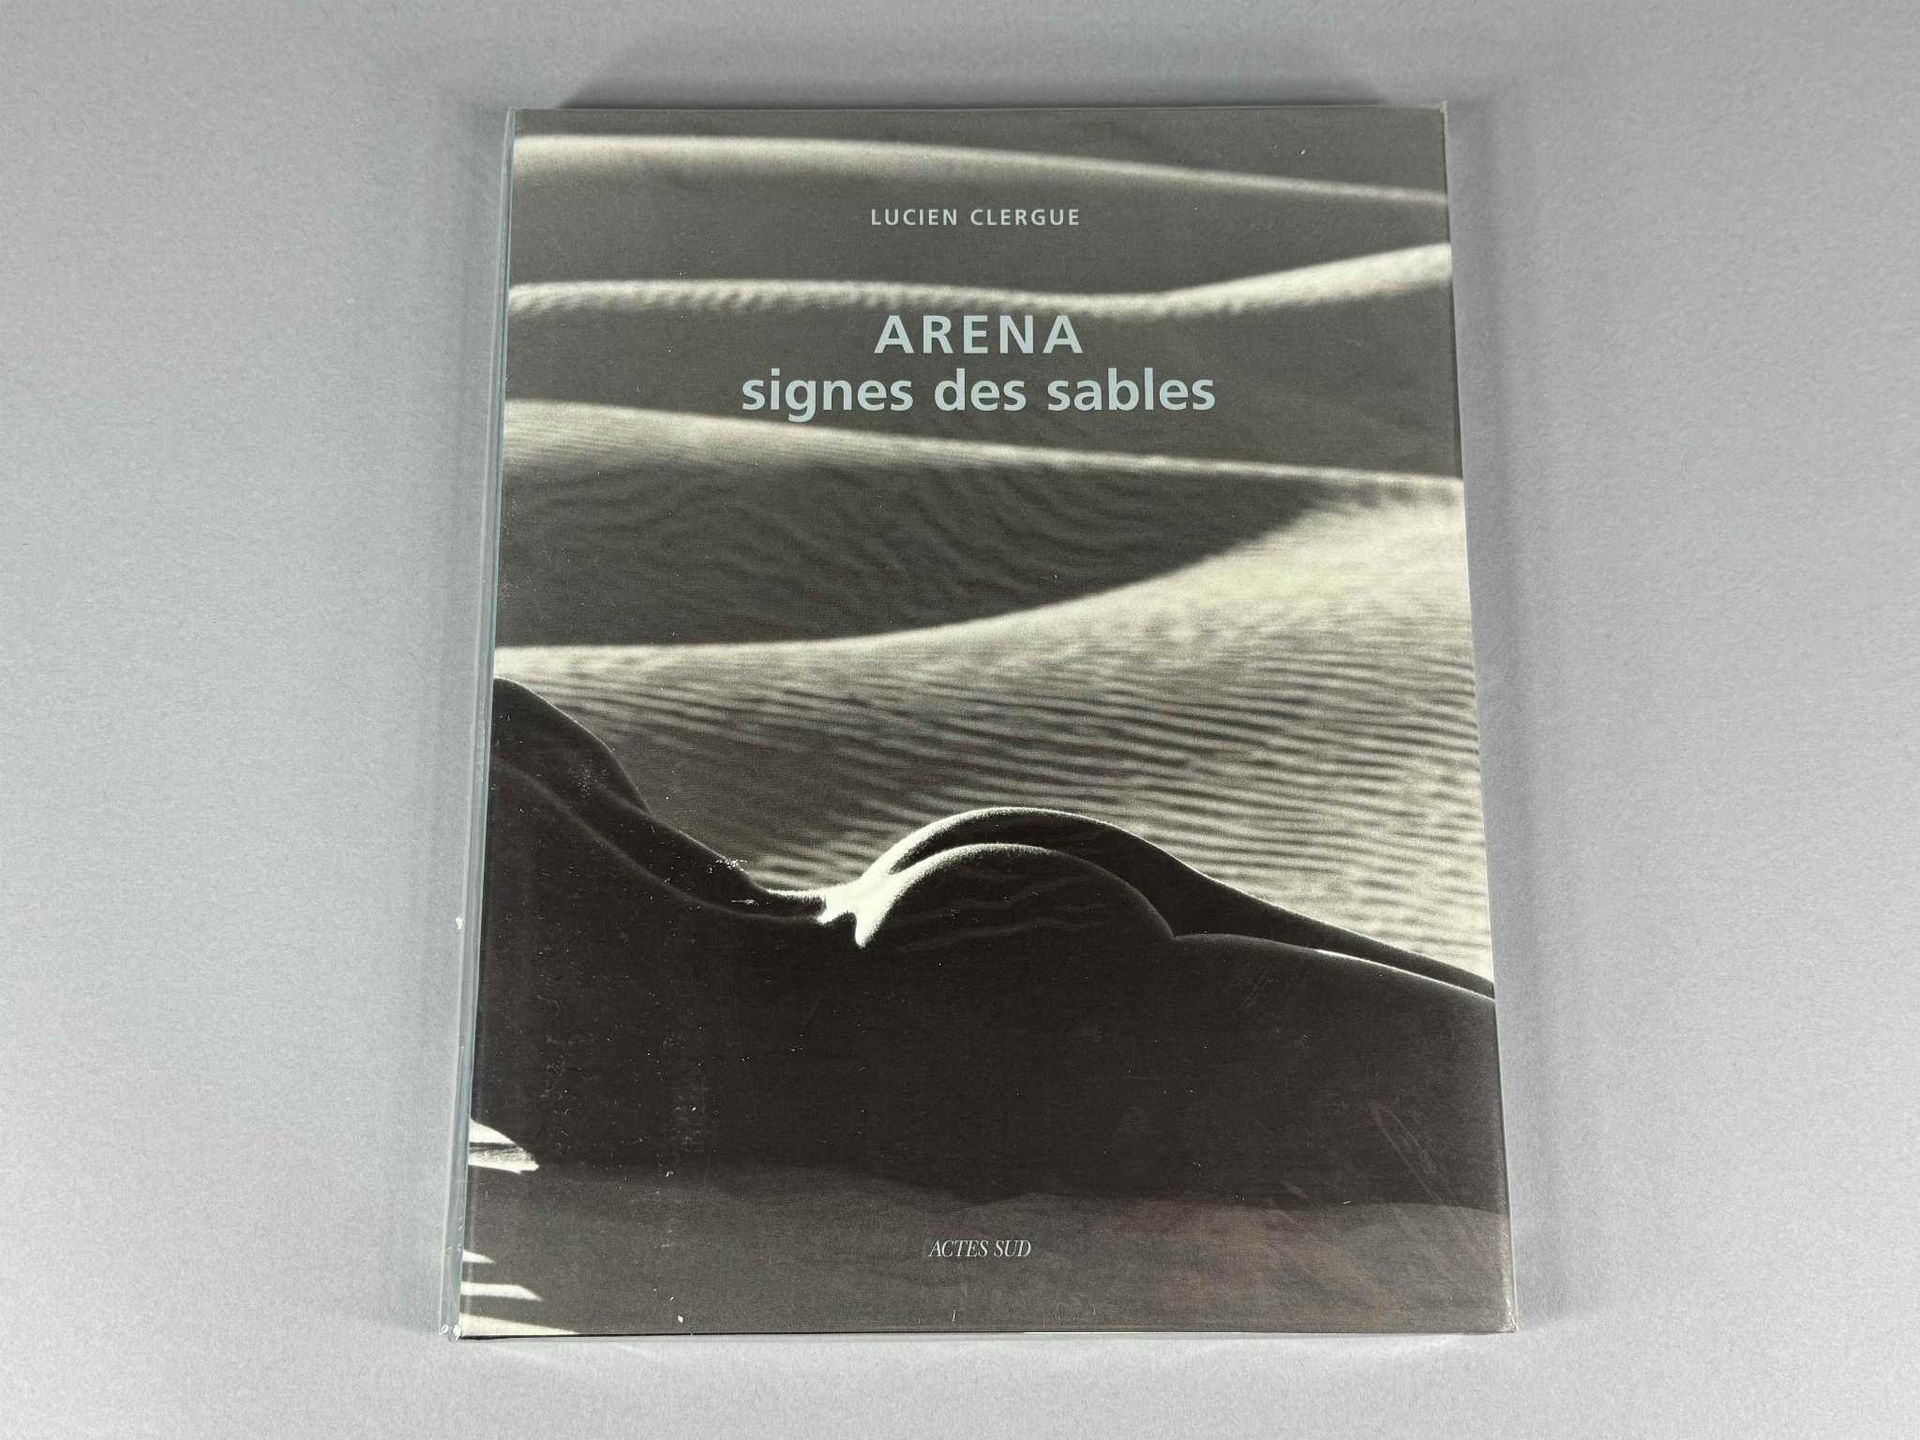 Null LUCIEN CLERGUE (1934-2014). Signed copy. Arena, sign of the sands. Actes Su&hellip;